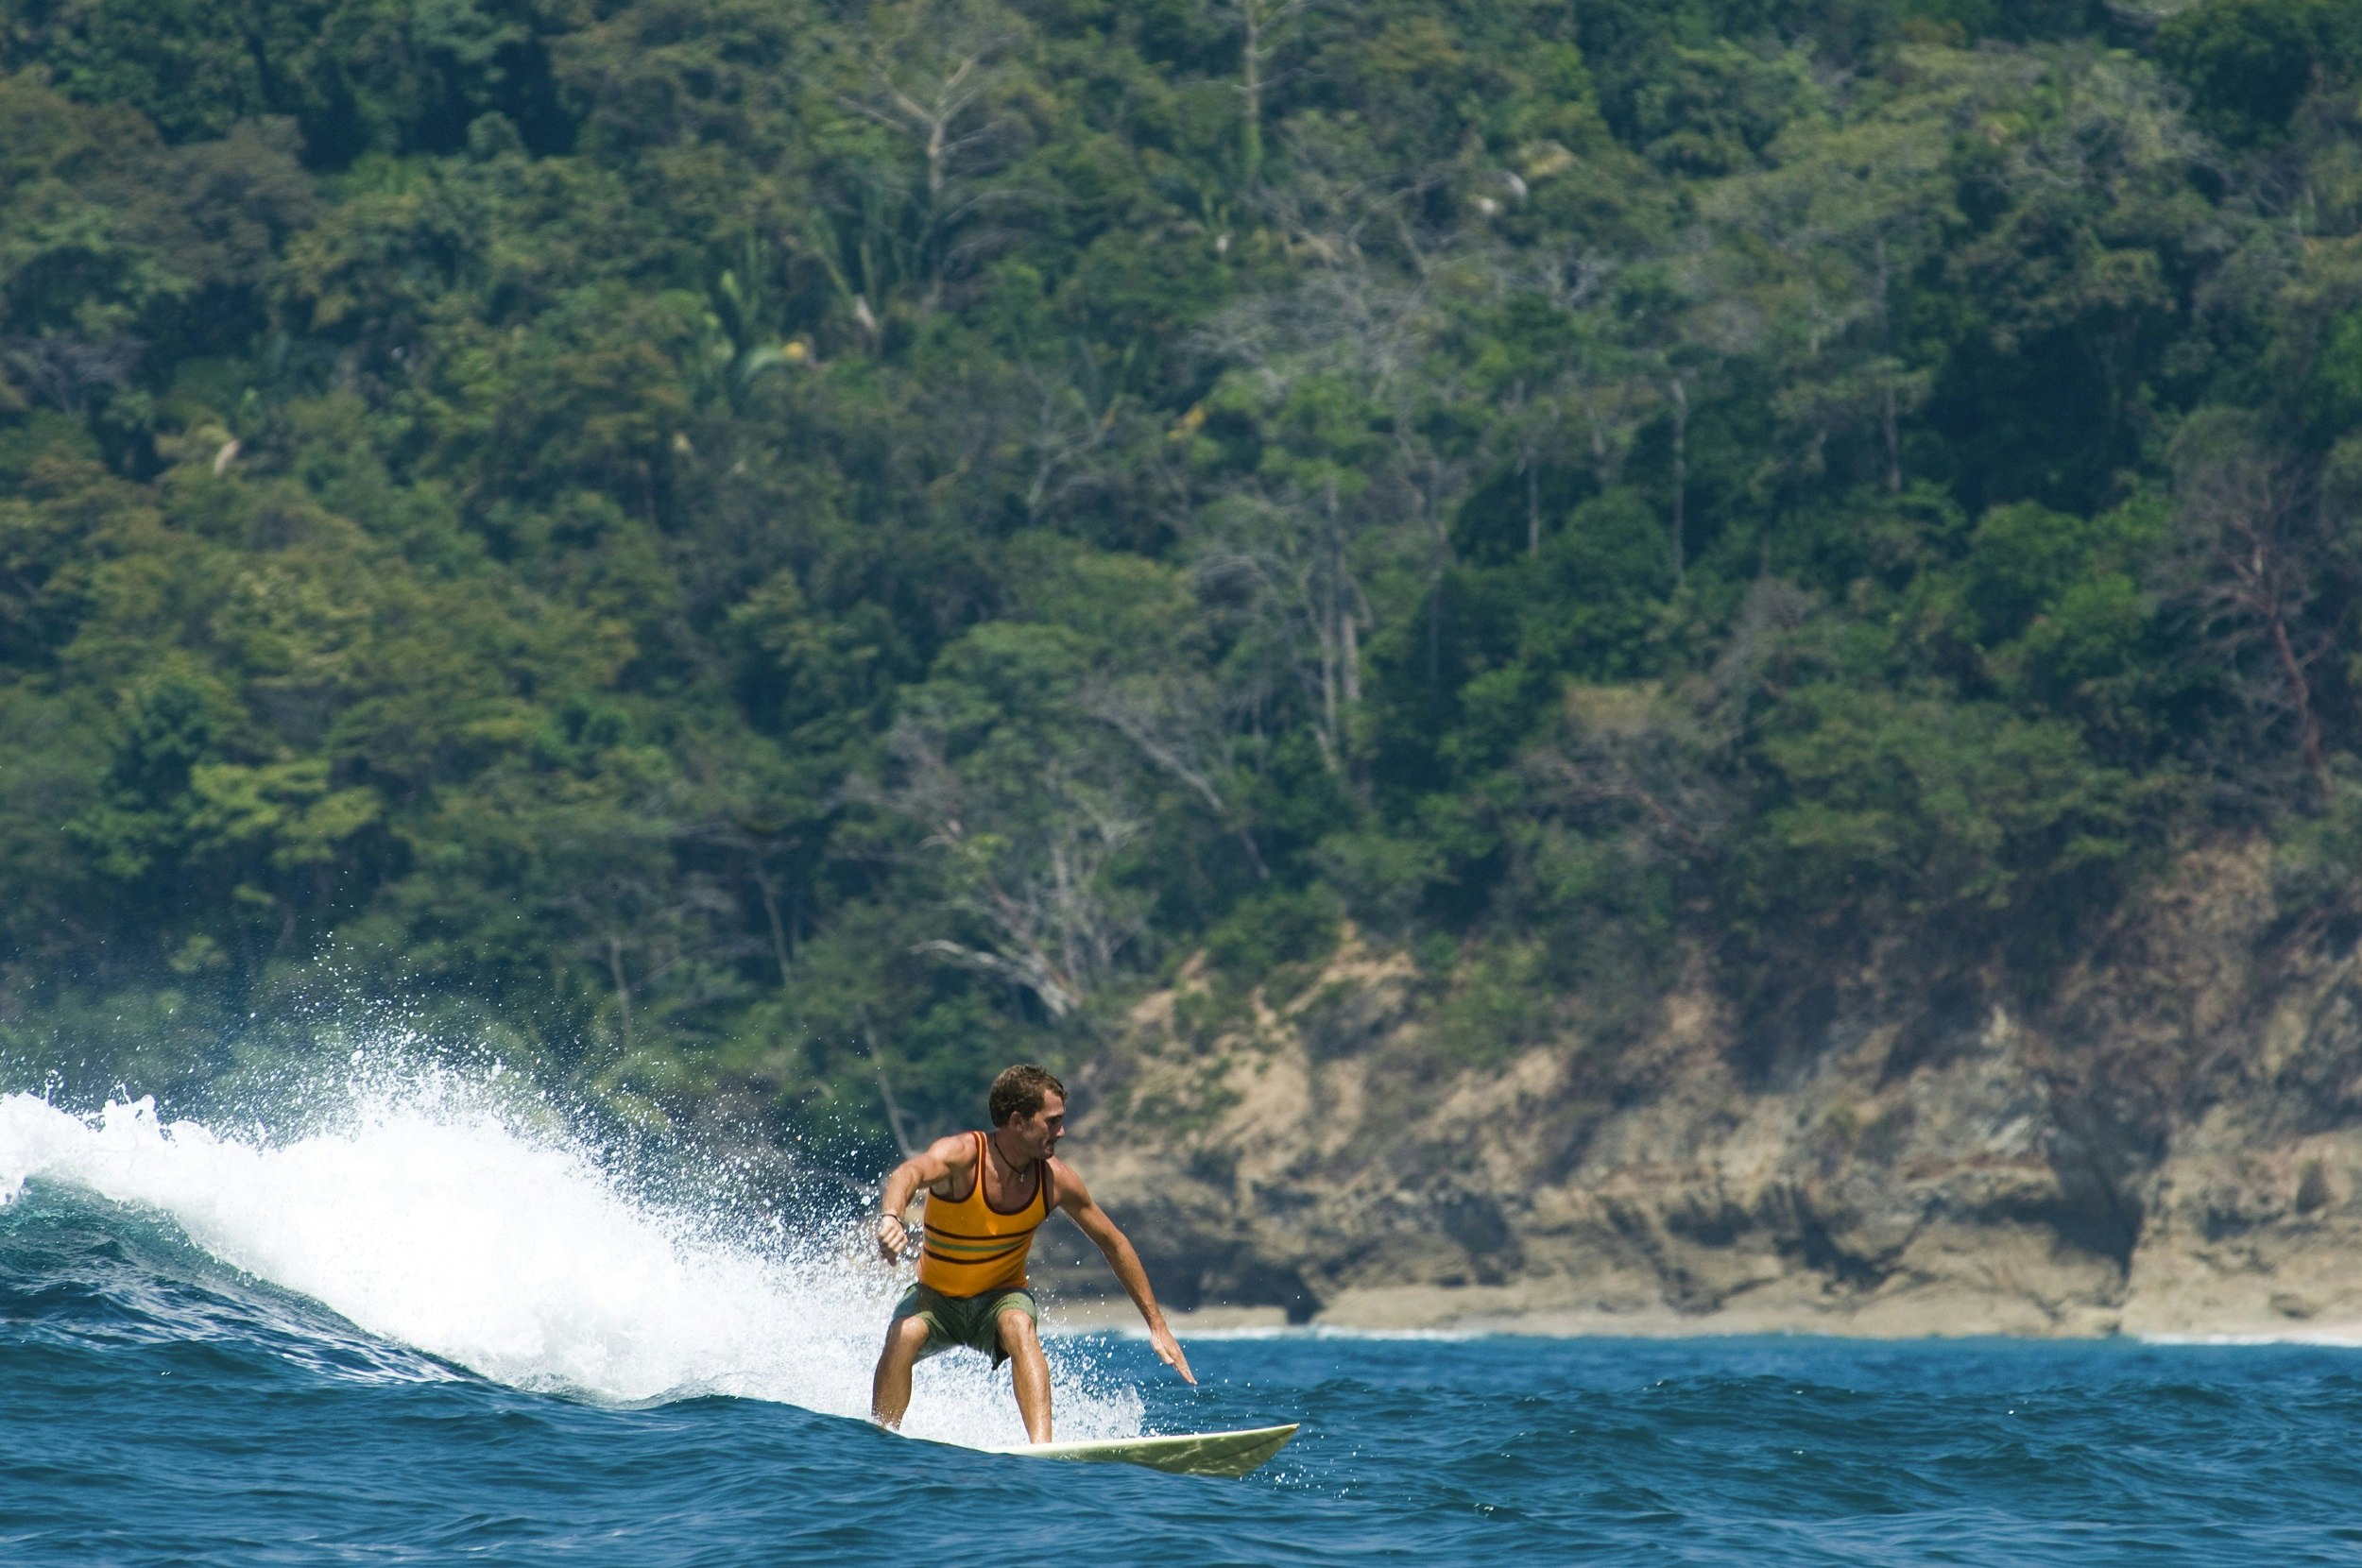  young man surfing a wave on the coast of Dominical; he's riding left to right, with the tree covered rocky cliffs in the background